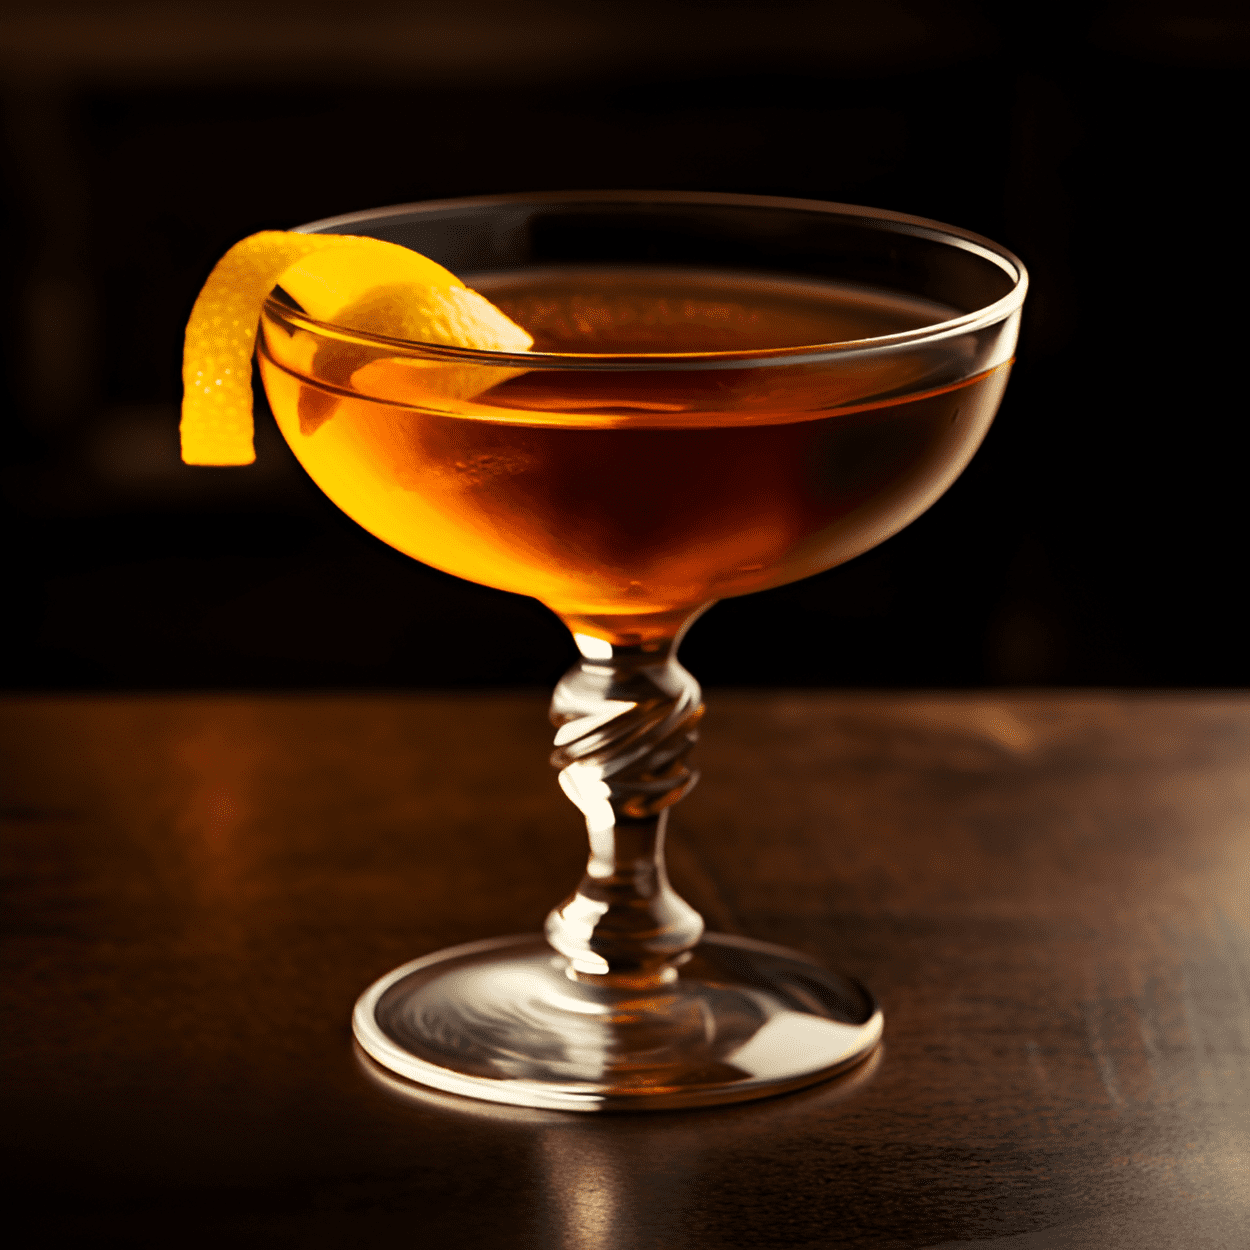 Bobby Burns Cocktail Recipe - The Bobby Burns cocktail is a robust, full-bodied drink with a rich sweetness from the vermouth and a hint of herbal complexity from the Benedictine. The Scotch whisky provides a smoky, malty backbone that's both warming and comforting.